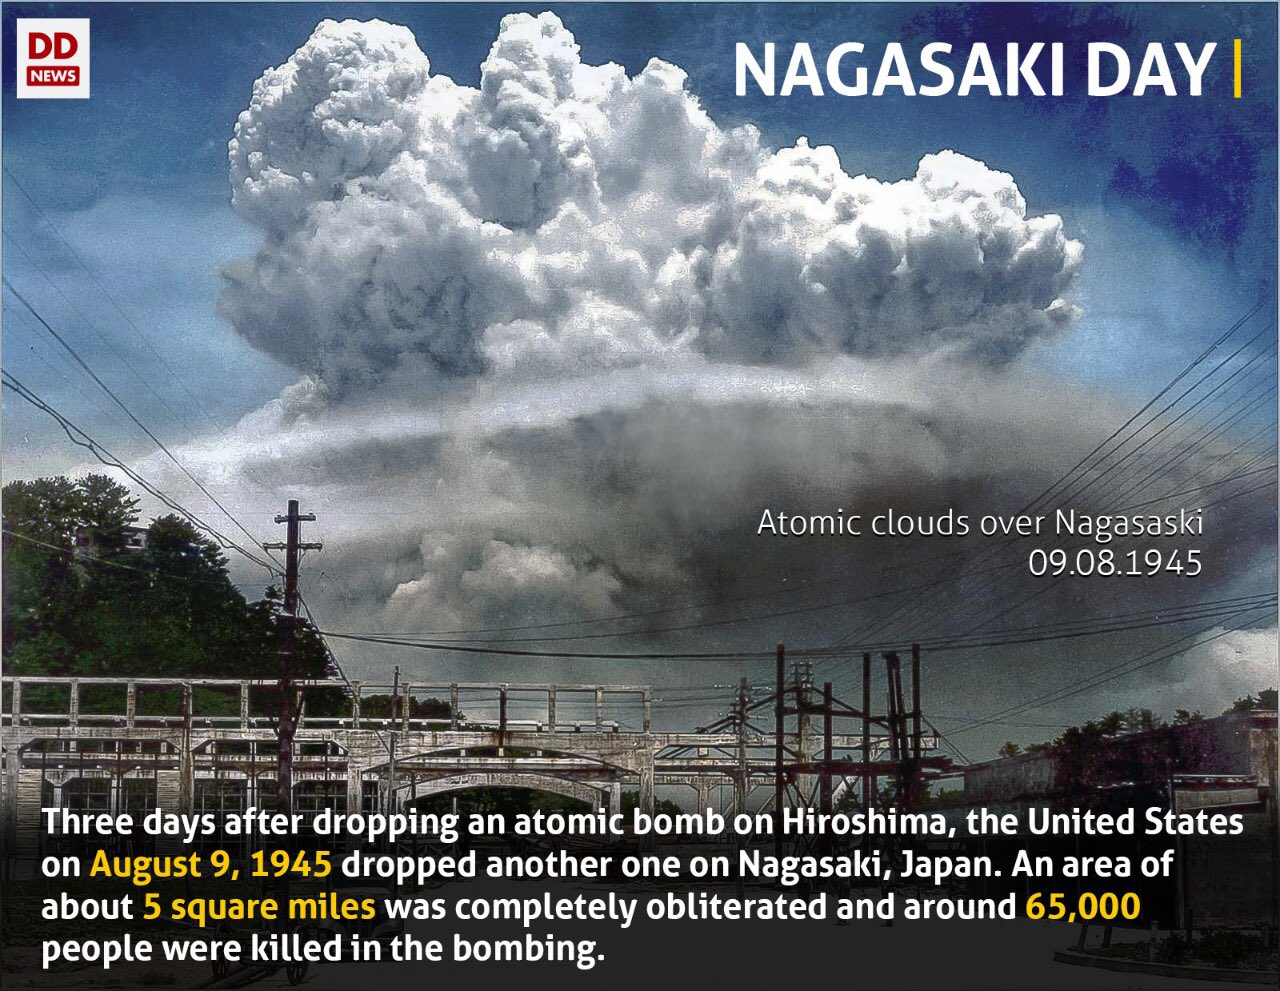 Dd News On This Day In 1945 The Us Dropped Atomic Bomb On Japan S City Nagasaki During World War Ii Since Then Nagasaki Day Is Observed Every Year On August